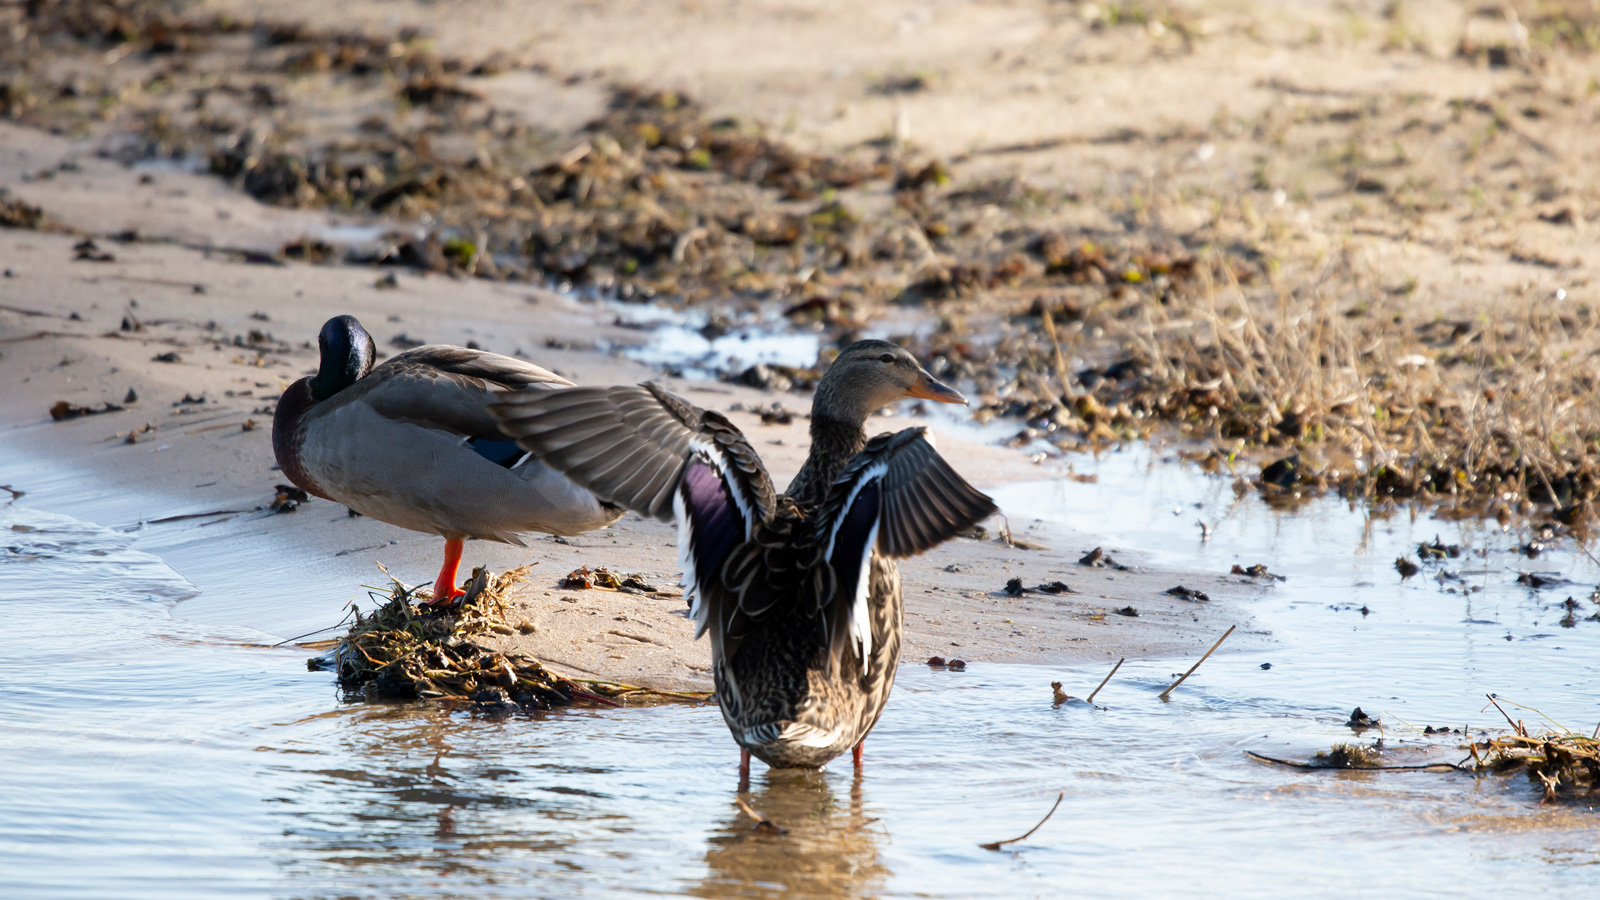 A female mallard preparing to fly from shallow water while another female mallard stands on sandy shore